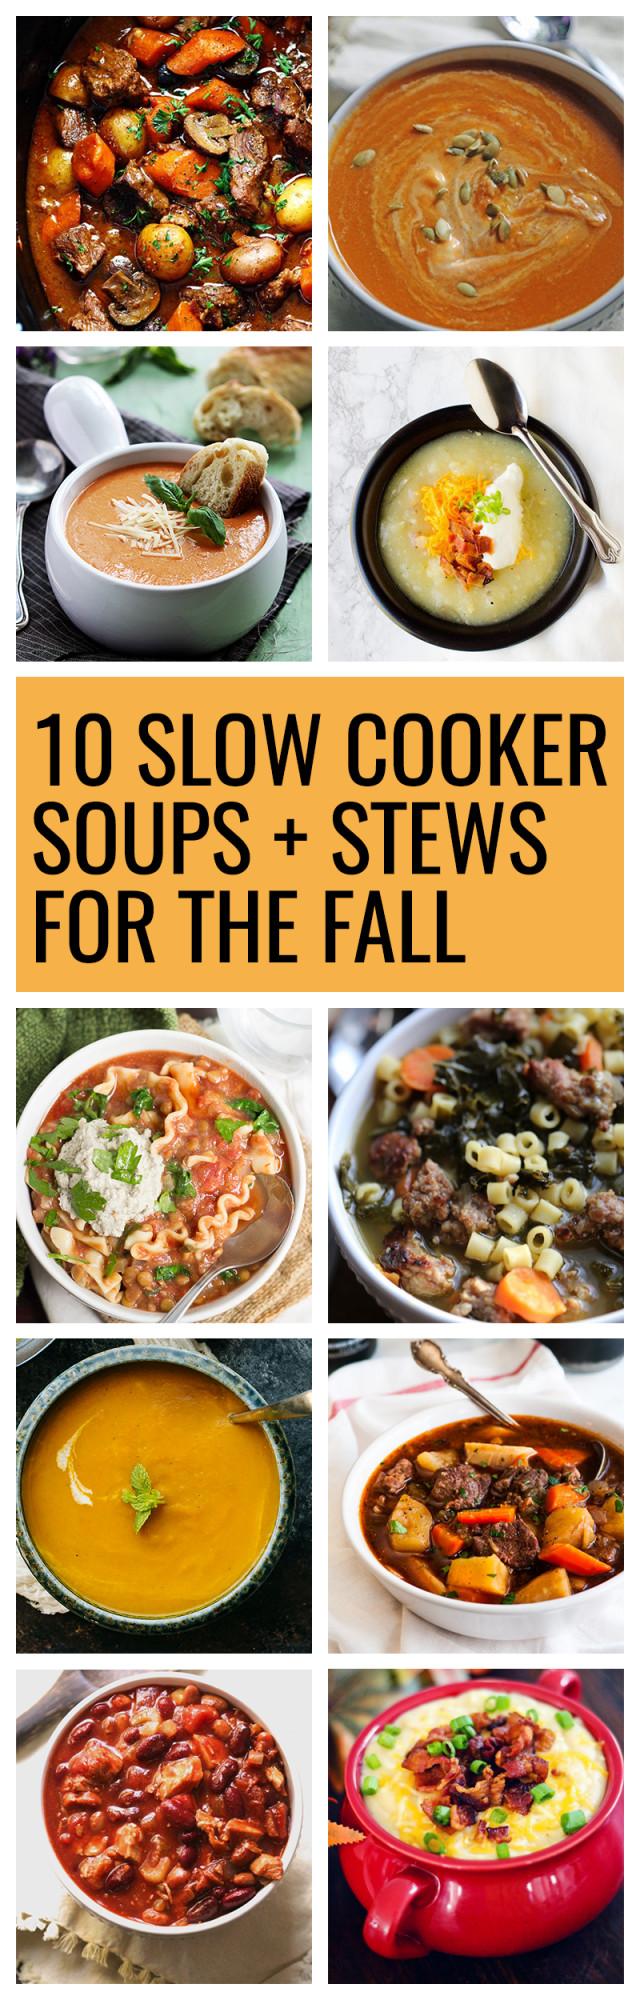 Fall Soup And Stew Recipes
 10 Fall Crockpot Slow Cooker Soup and Stew Recipes